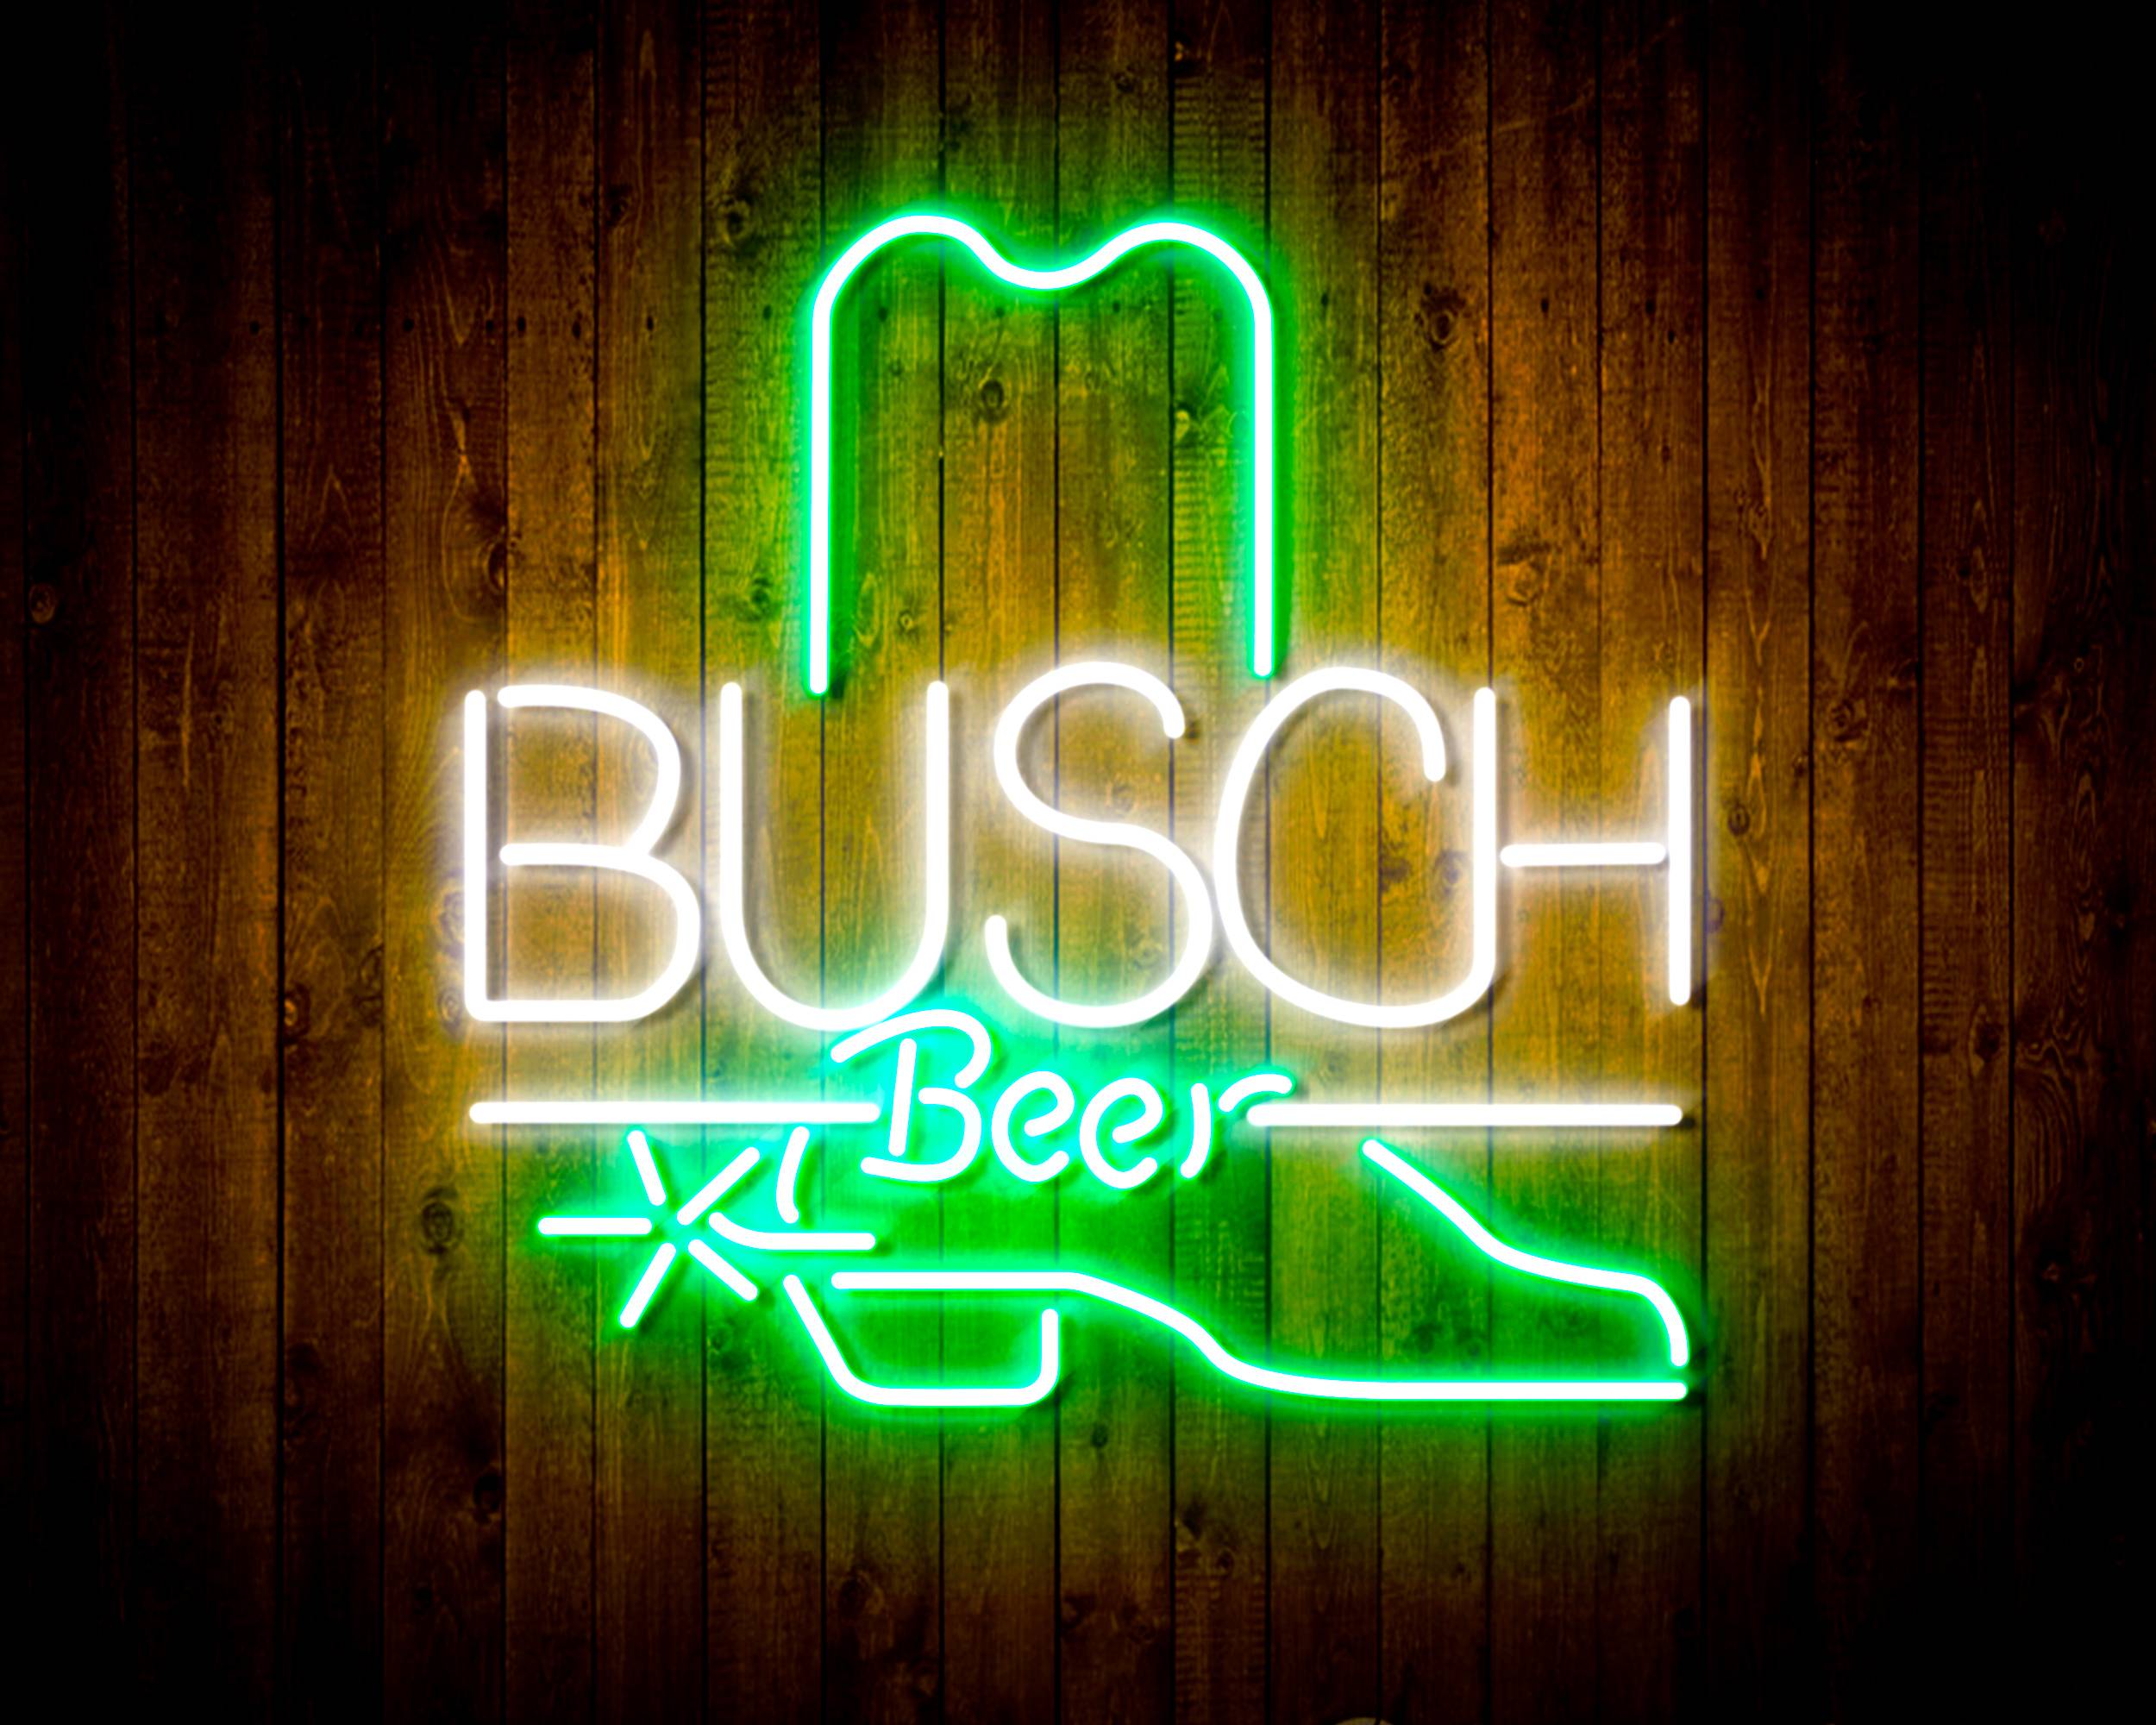 Busch Beer with Boot Handmade LED Neon Light Sign